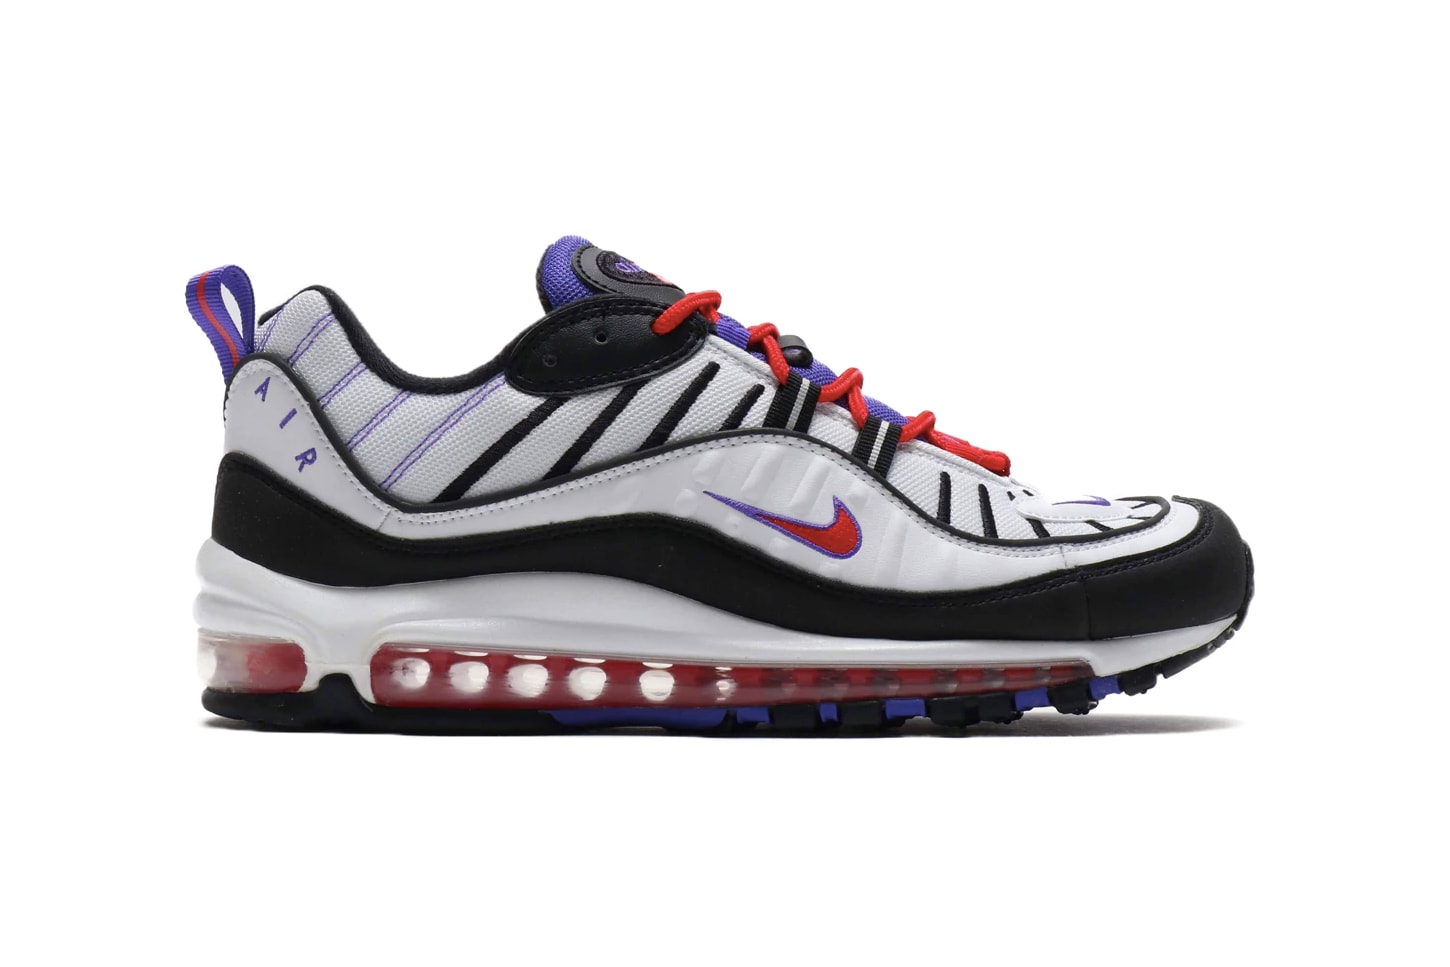 Nike Air Max 98 White Psychic Purple footwear sneakers raptors toronto nba air unit sole cushioning technology mesh leather round laces bubbles translucent